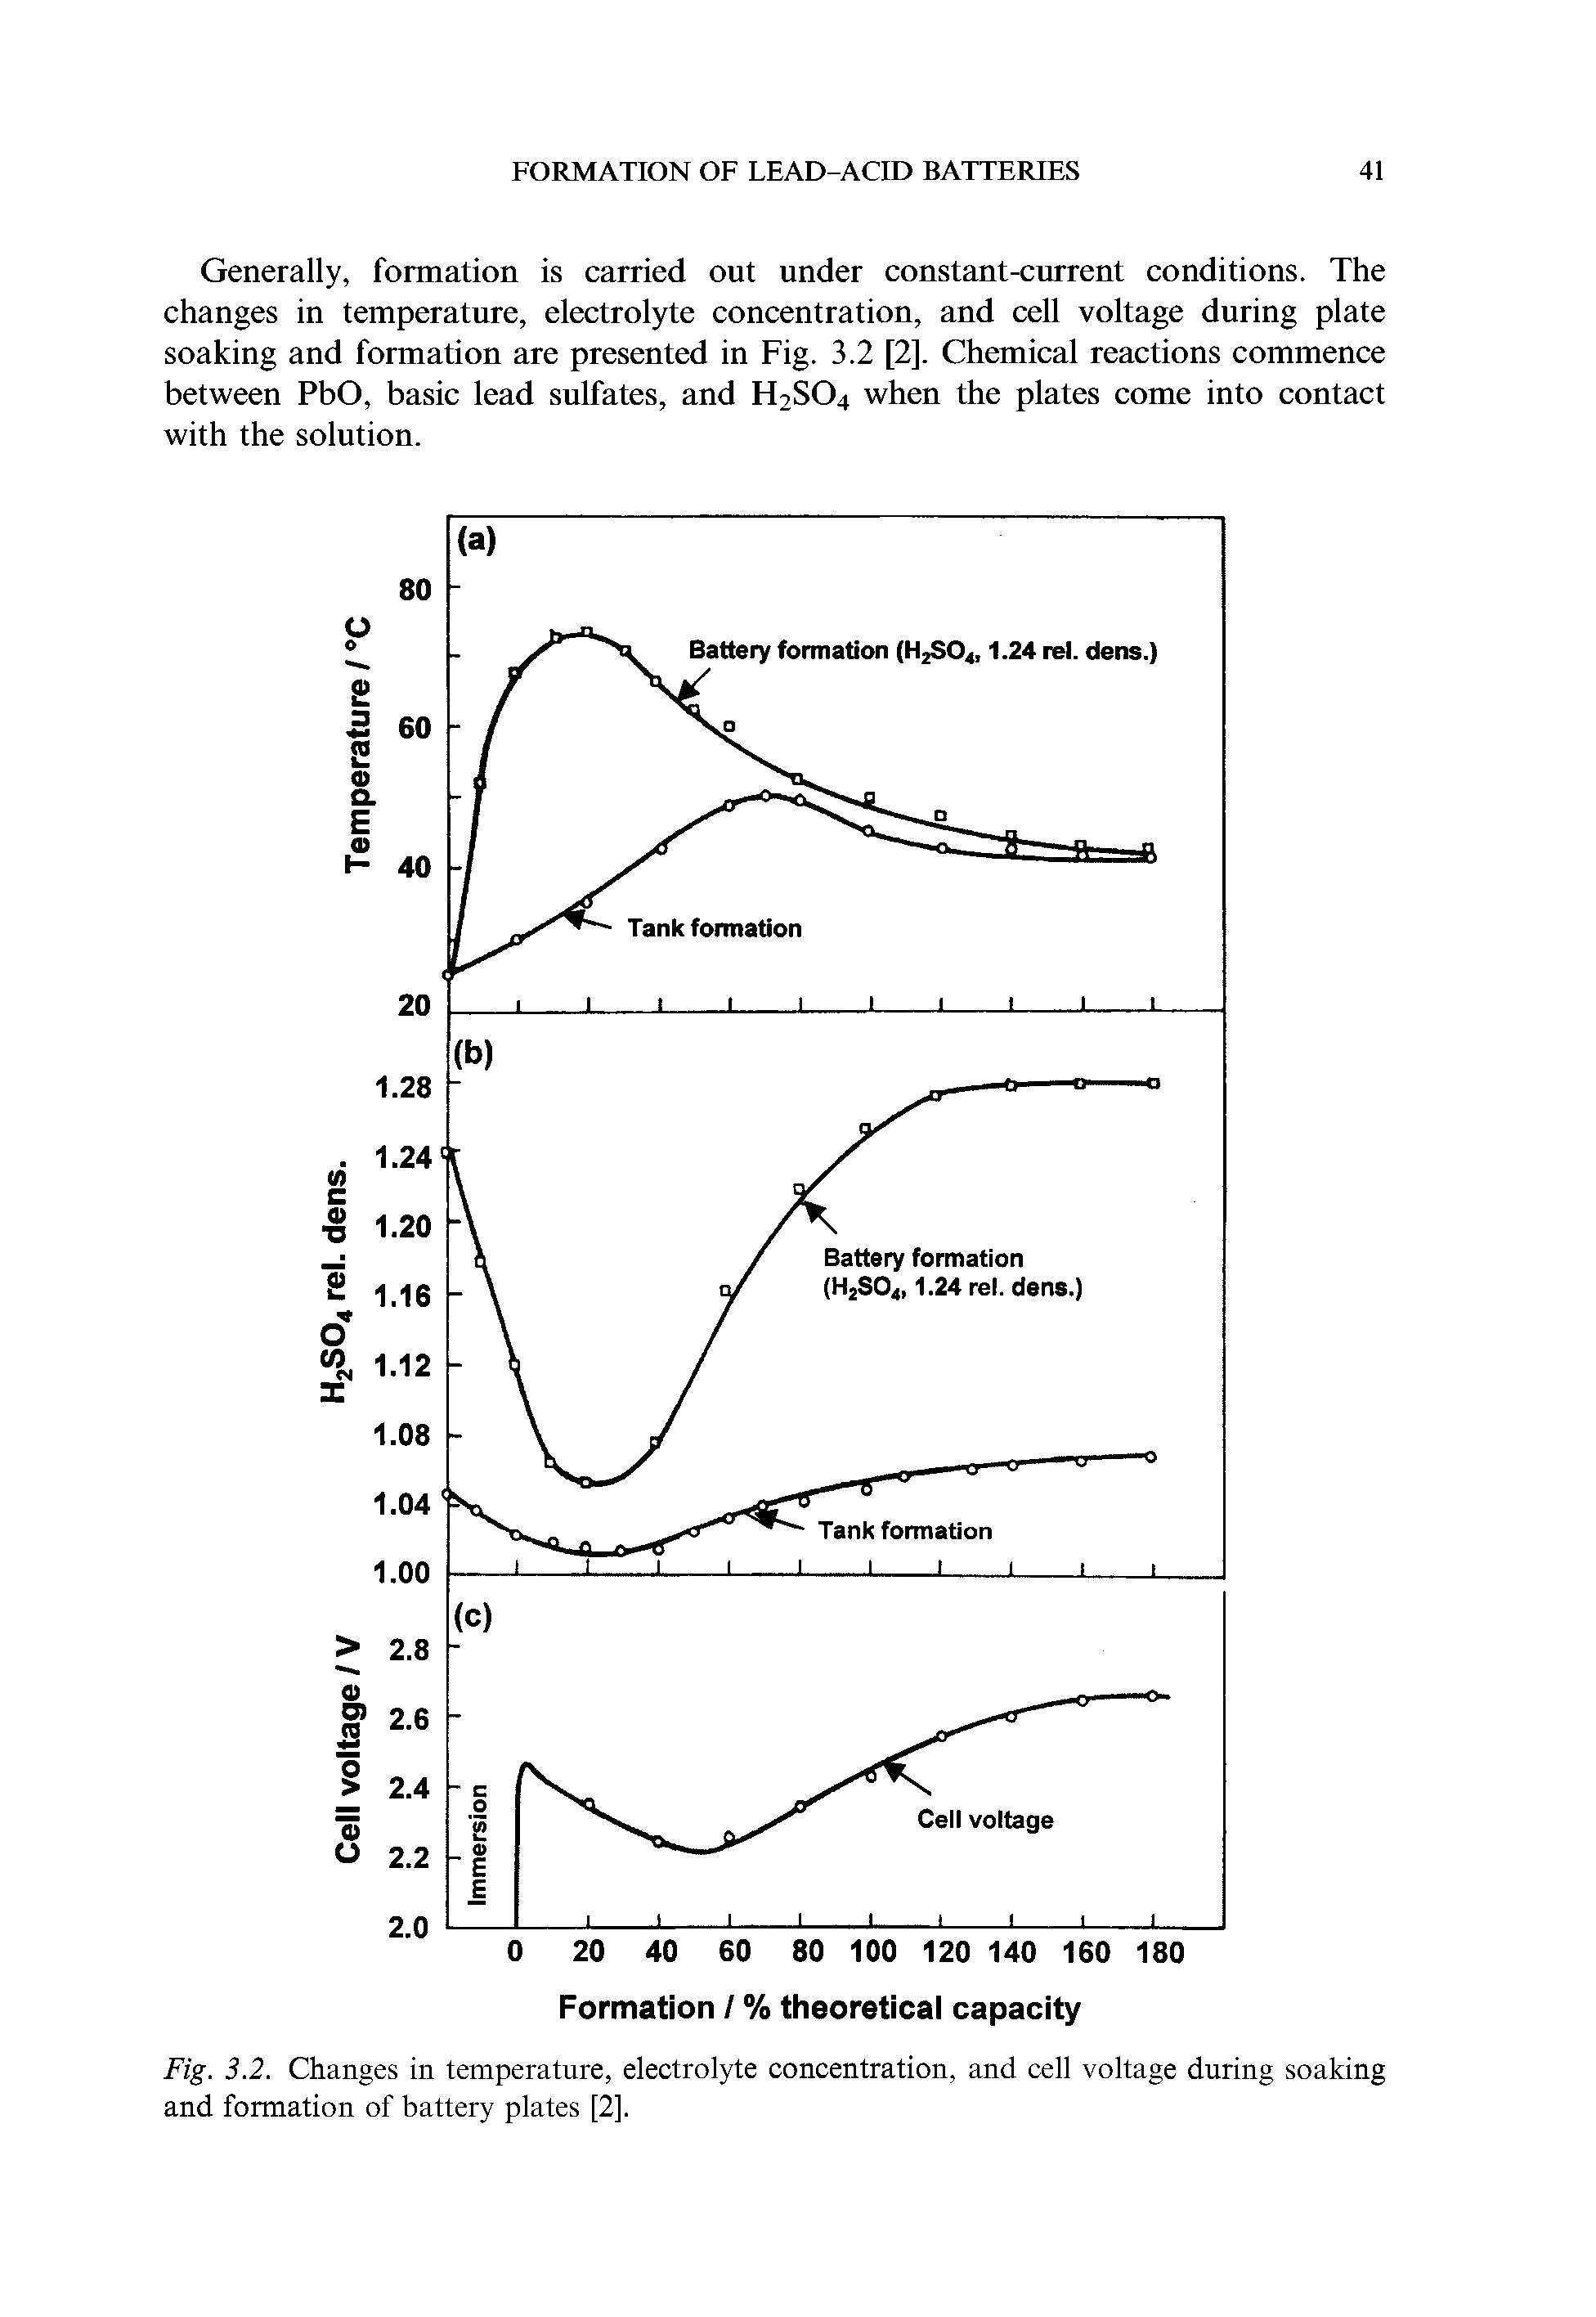 Fig. 3.2. Changes in temperature, electrolyte concentration, and cell voltage during soaking and formation of battery plates [2].